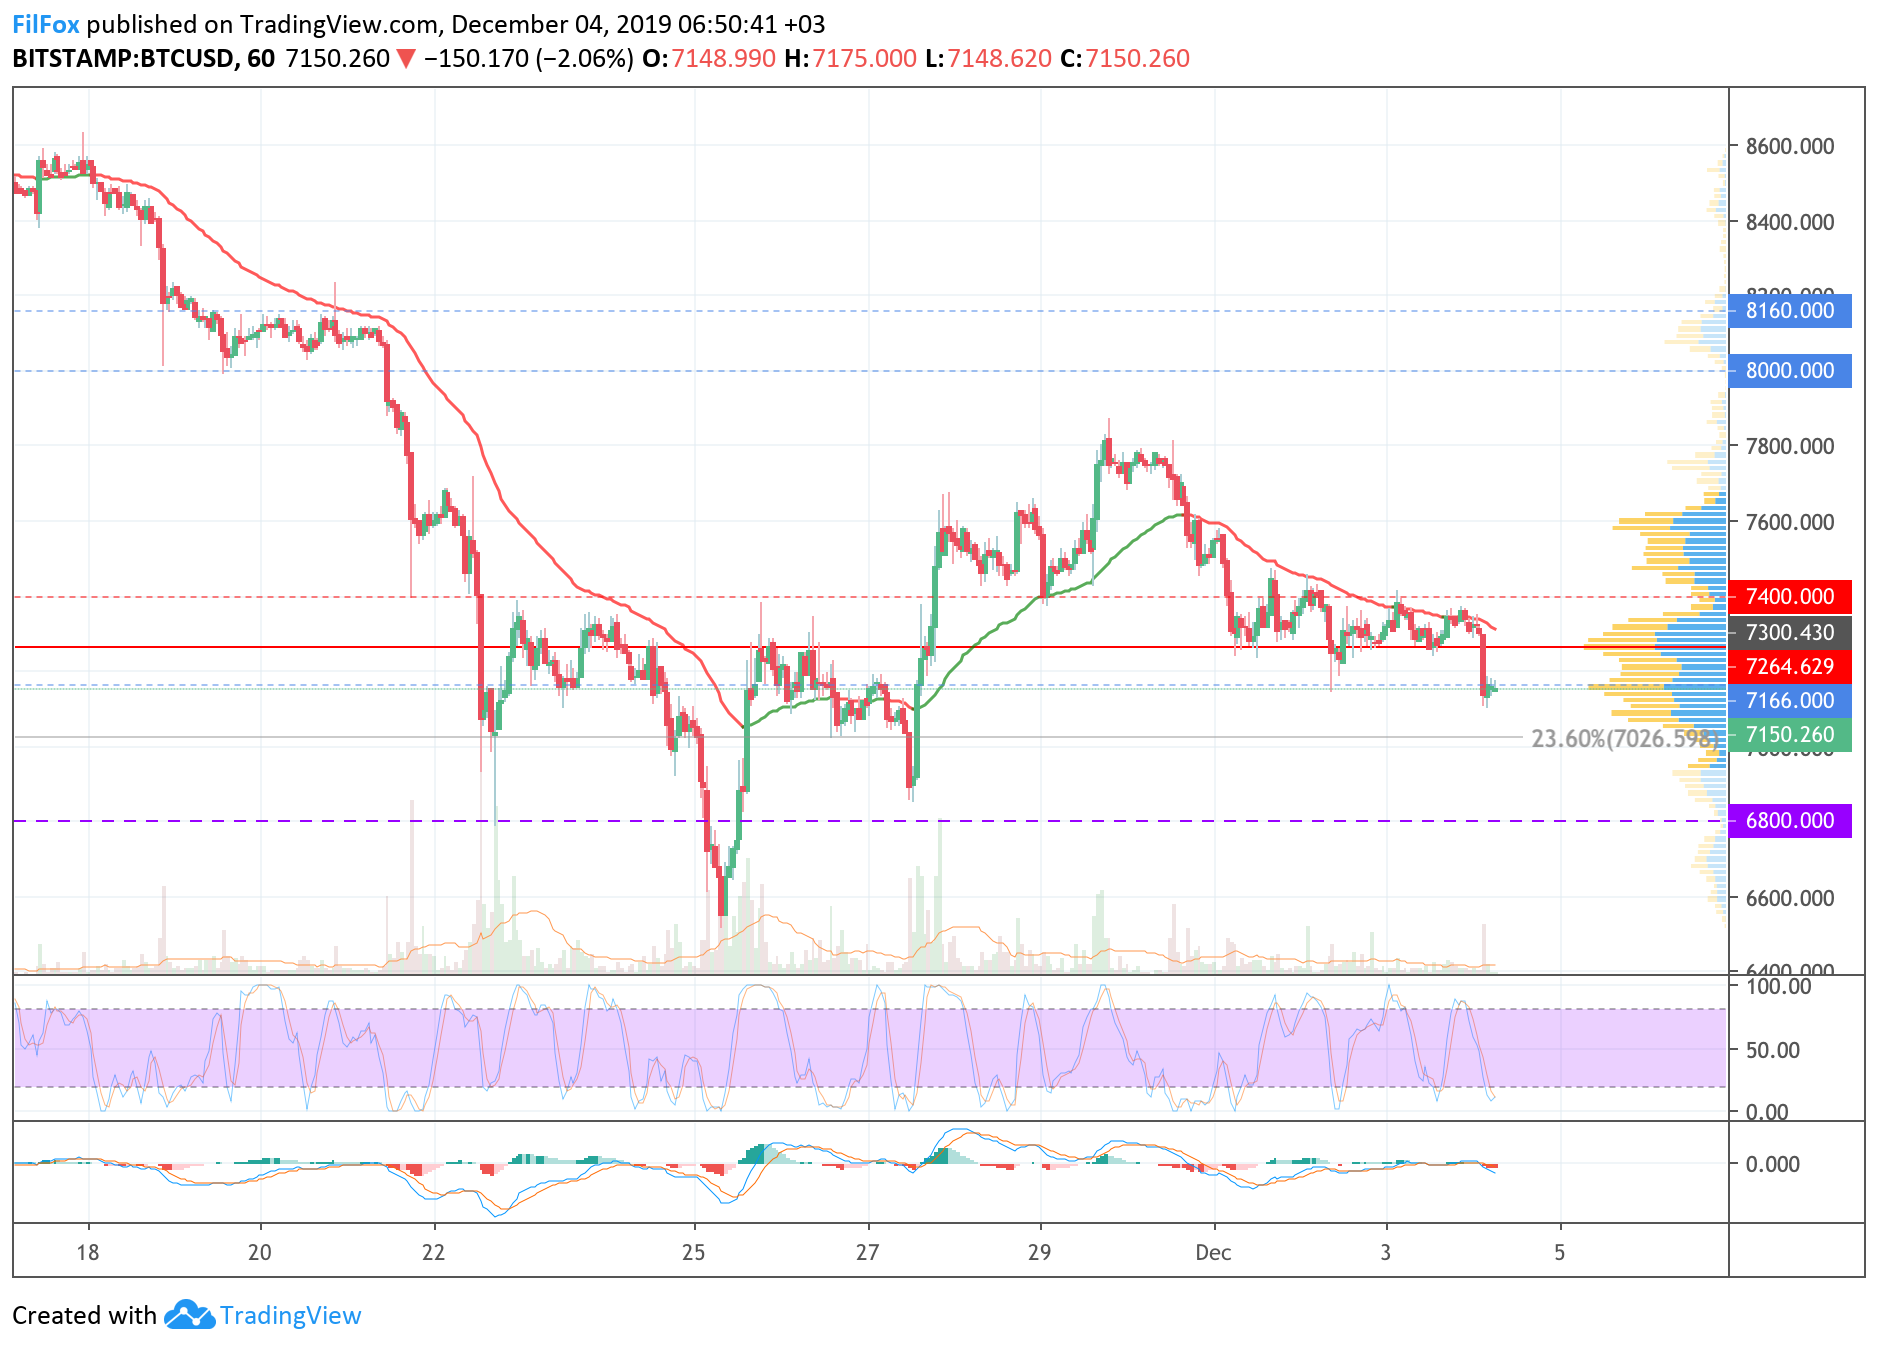 Analysis of cryptocurrency pairs BTC / USD, ETH / USD and XRP / USD on 12/04/2019